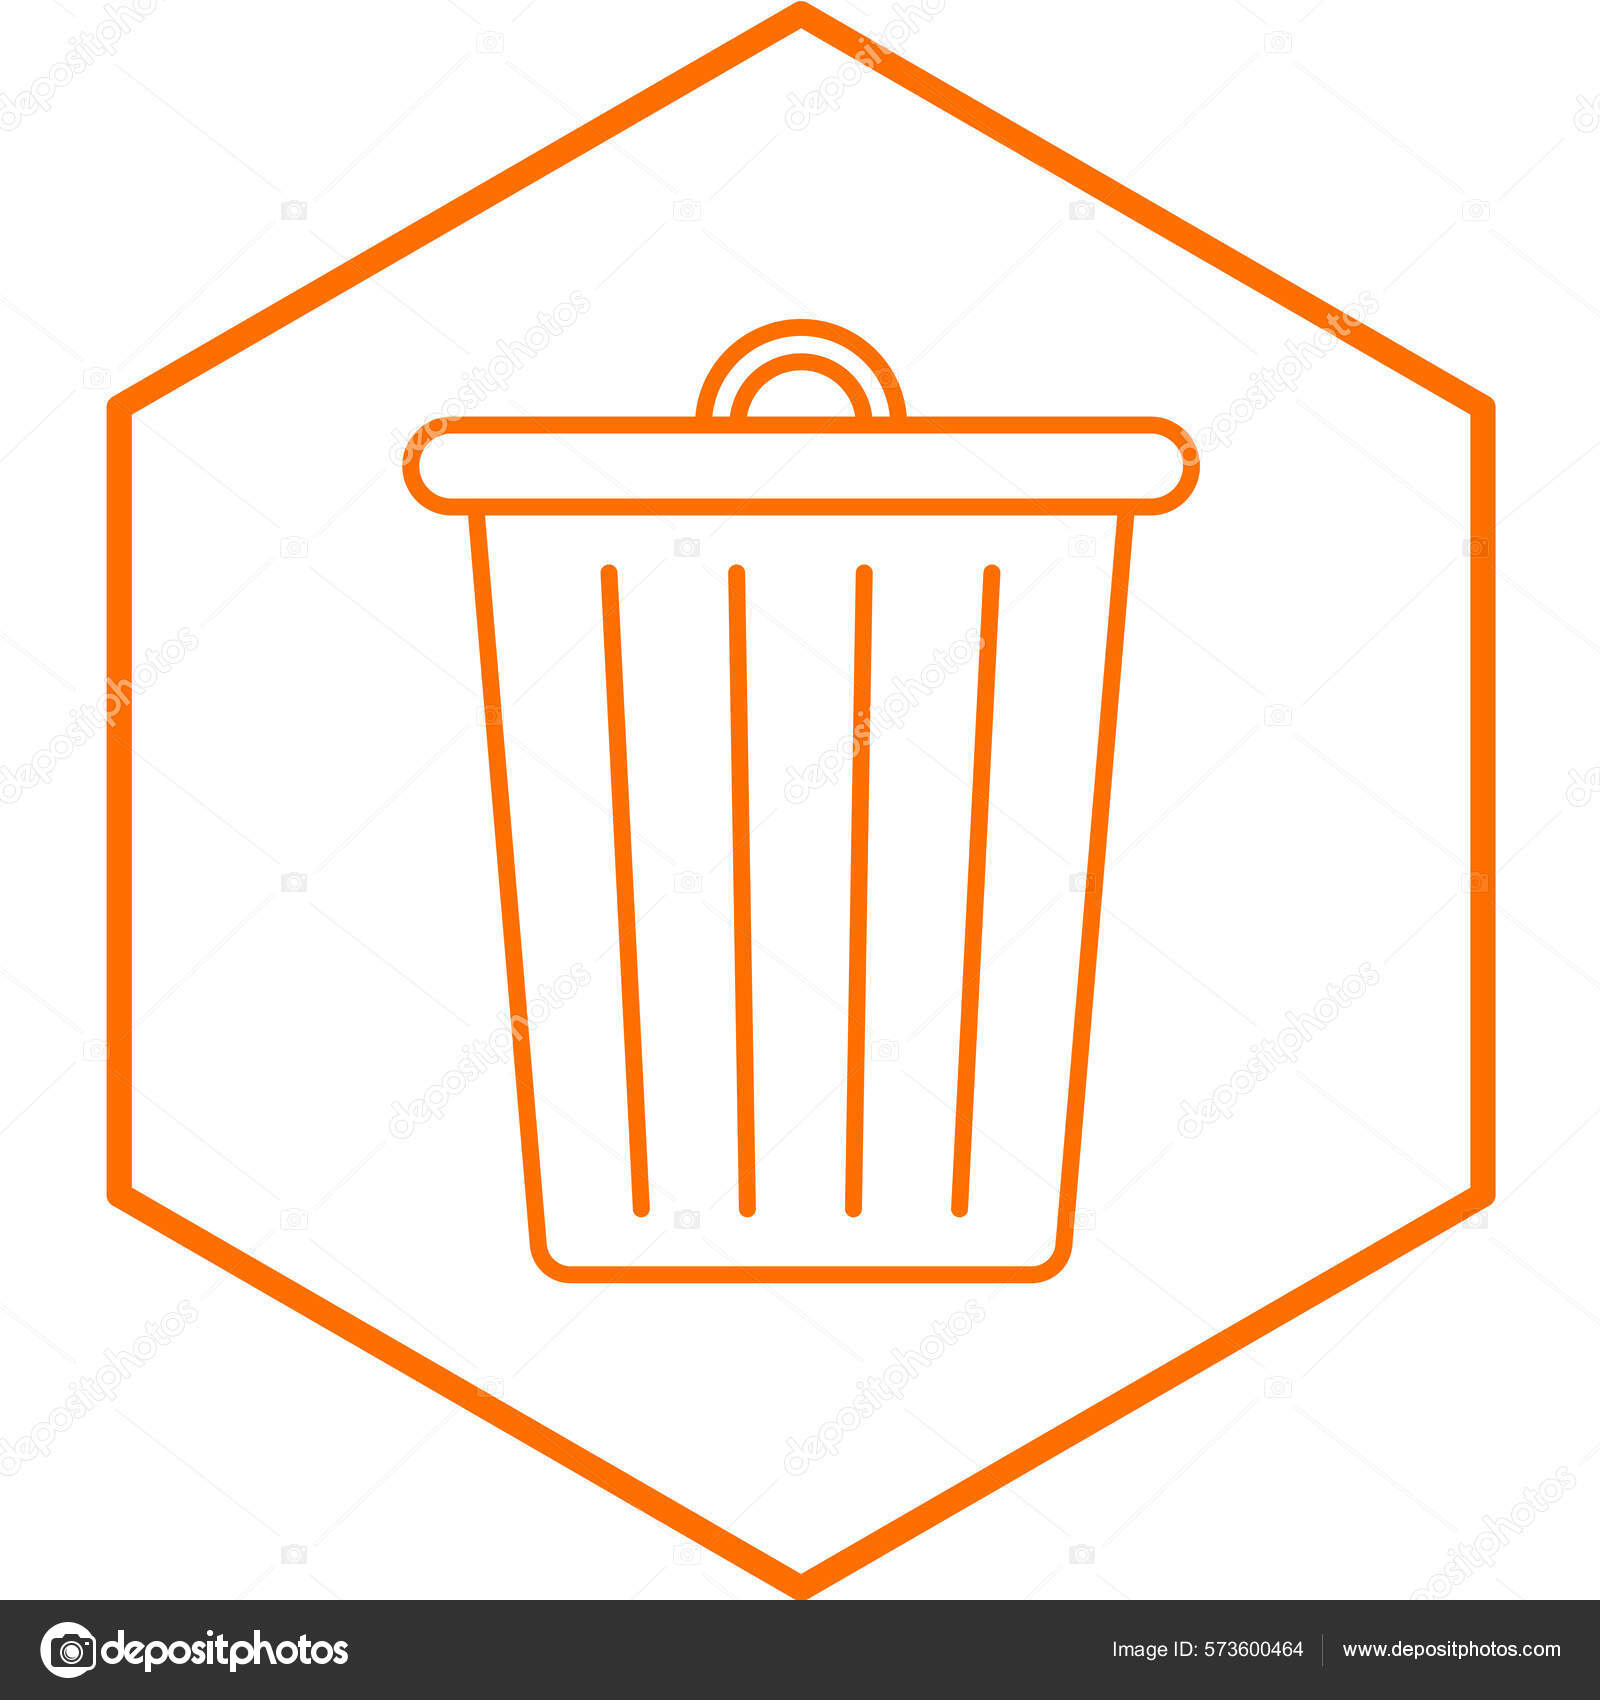 Simple Illustration Of A Trash Can Stock Illustration - Download